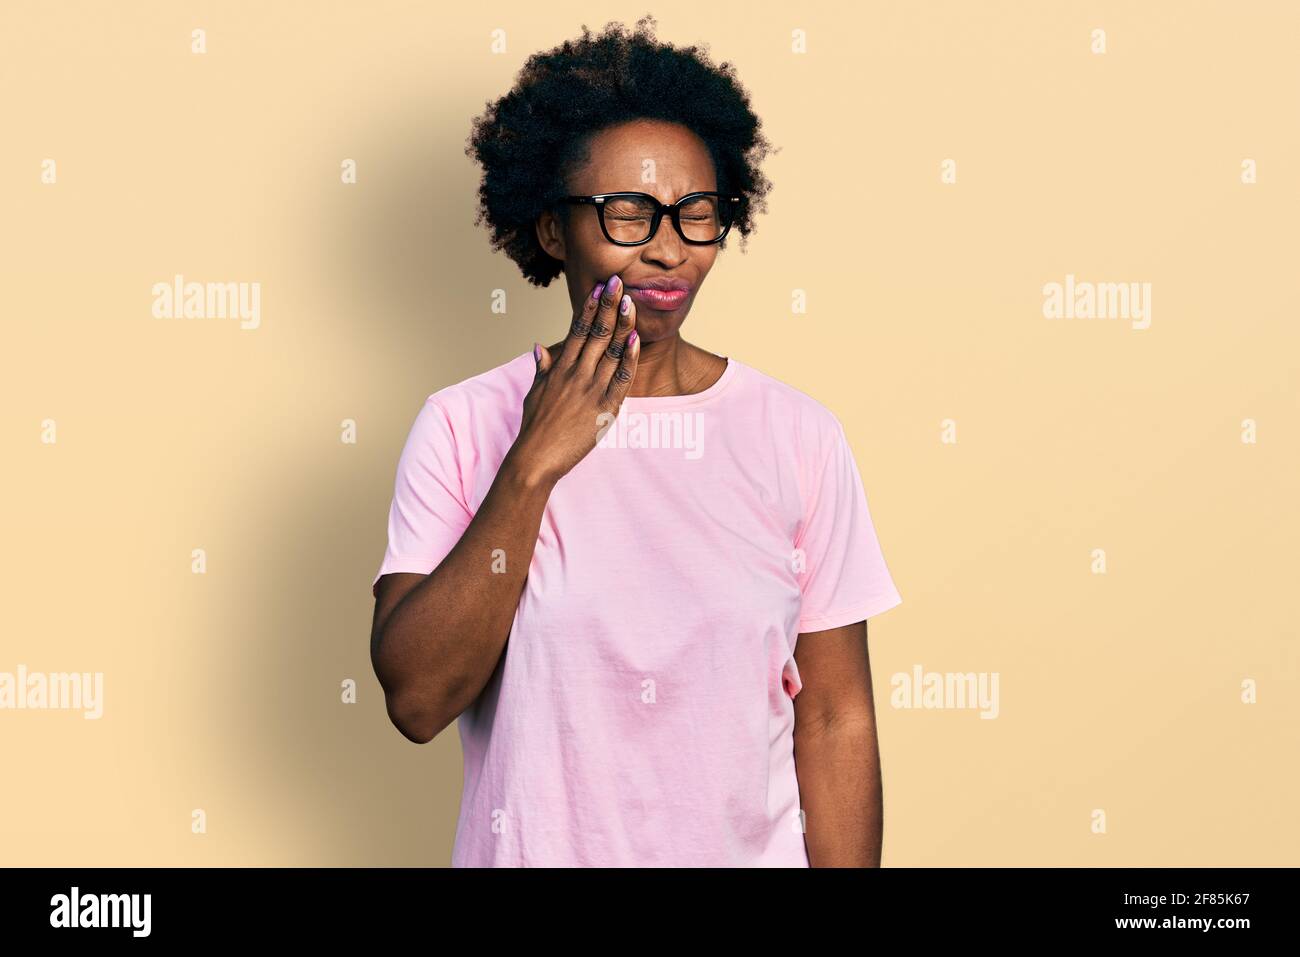 African american woman with afro hair wearing casual clothes and glasses touching mouth with hand with painful expression because of toothache or dent Stock Photo